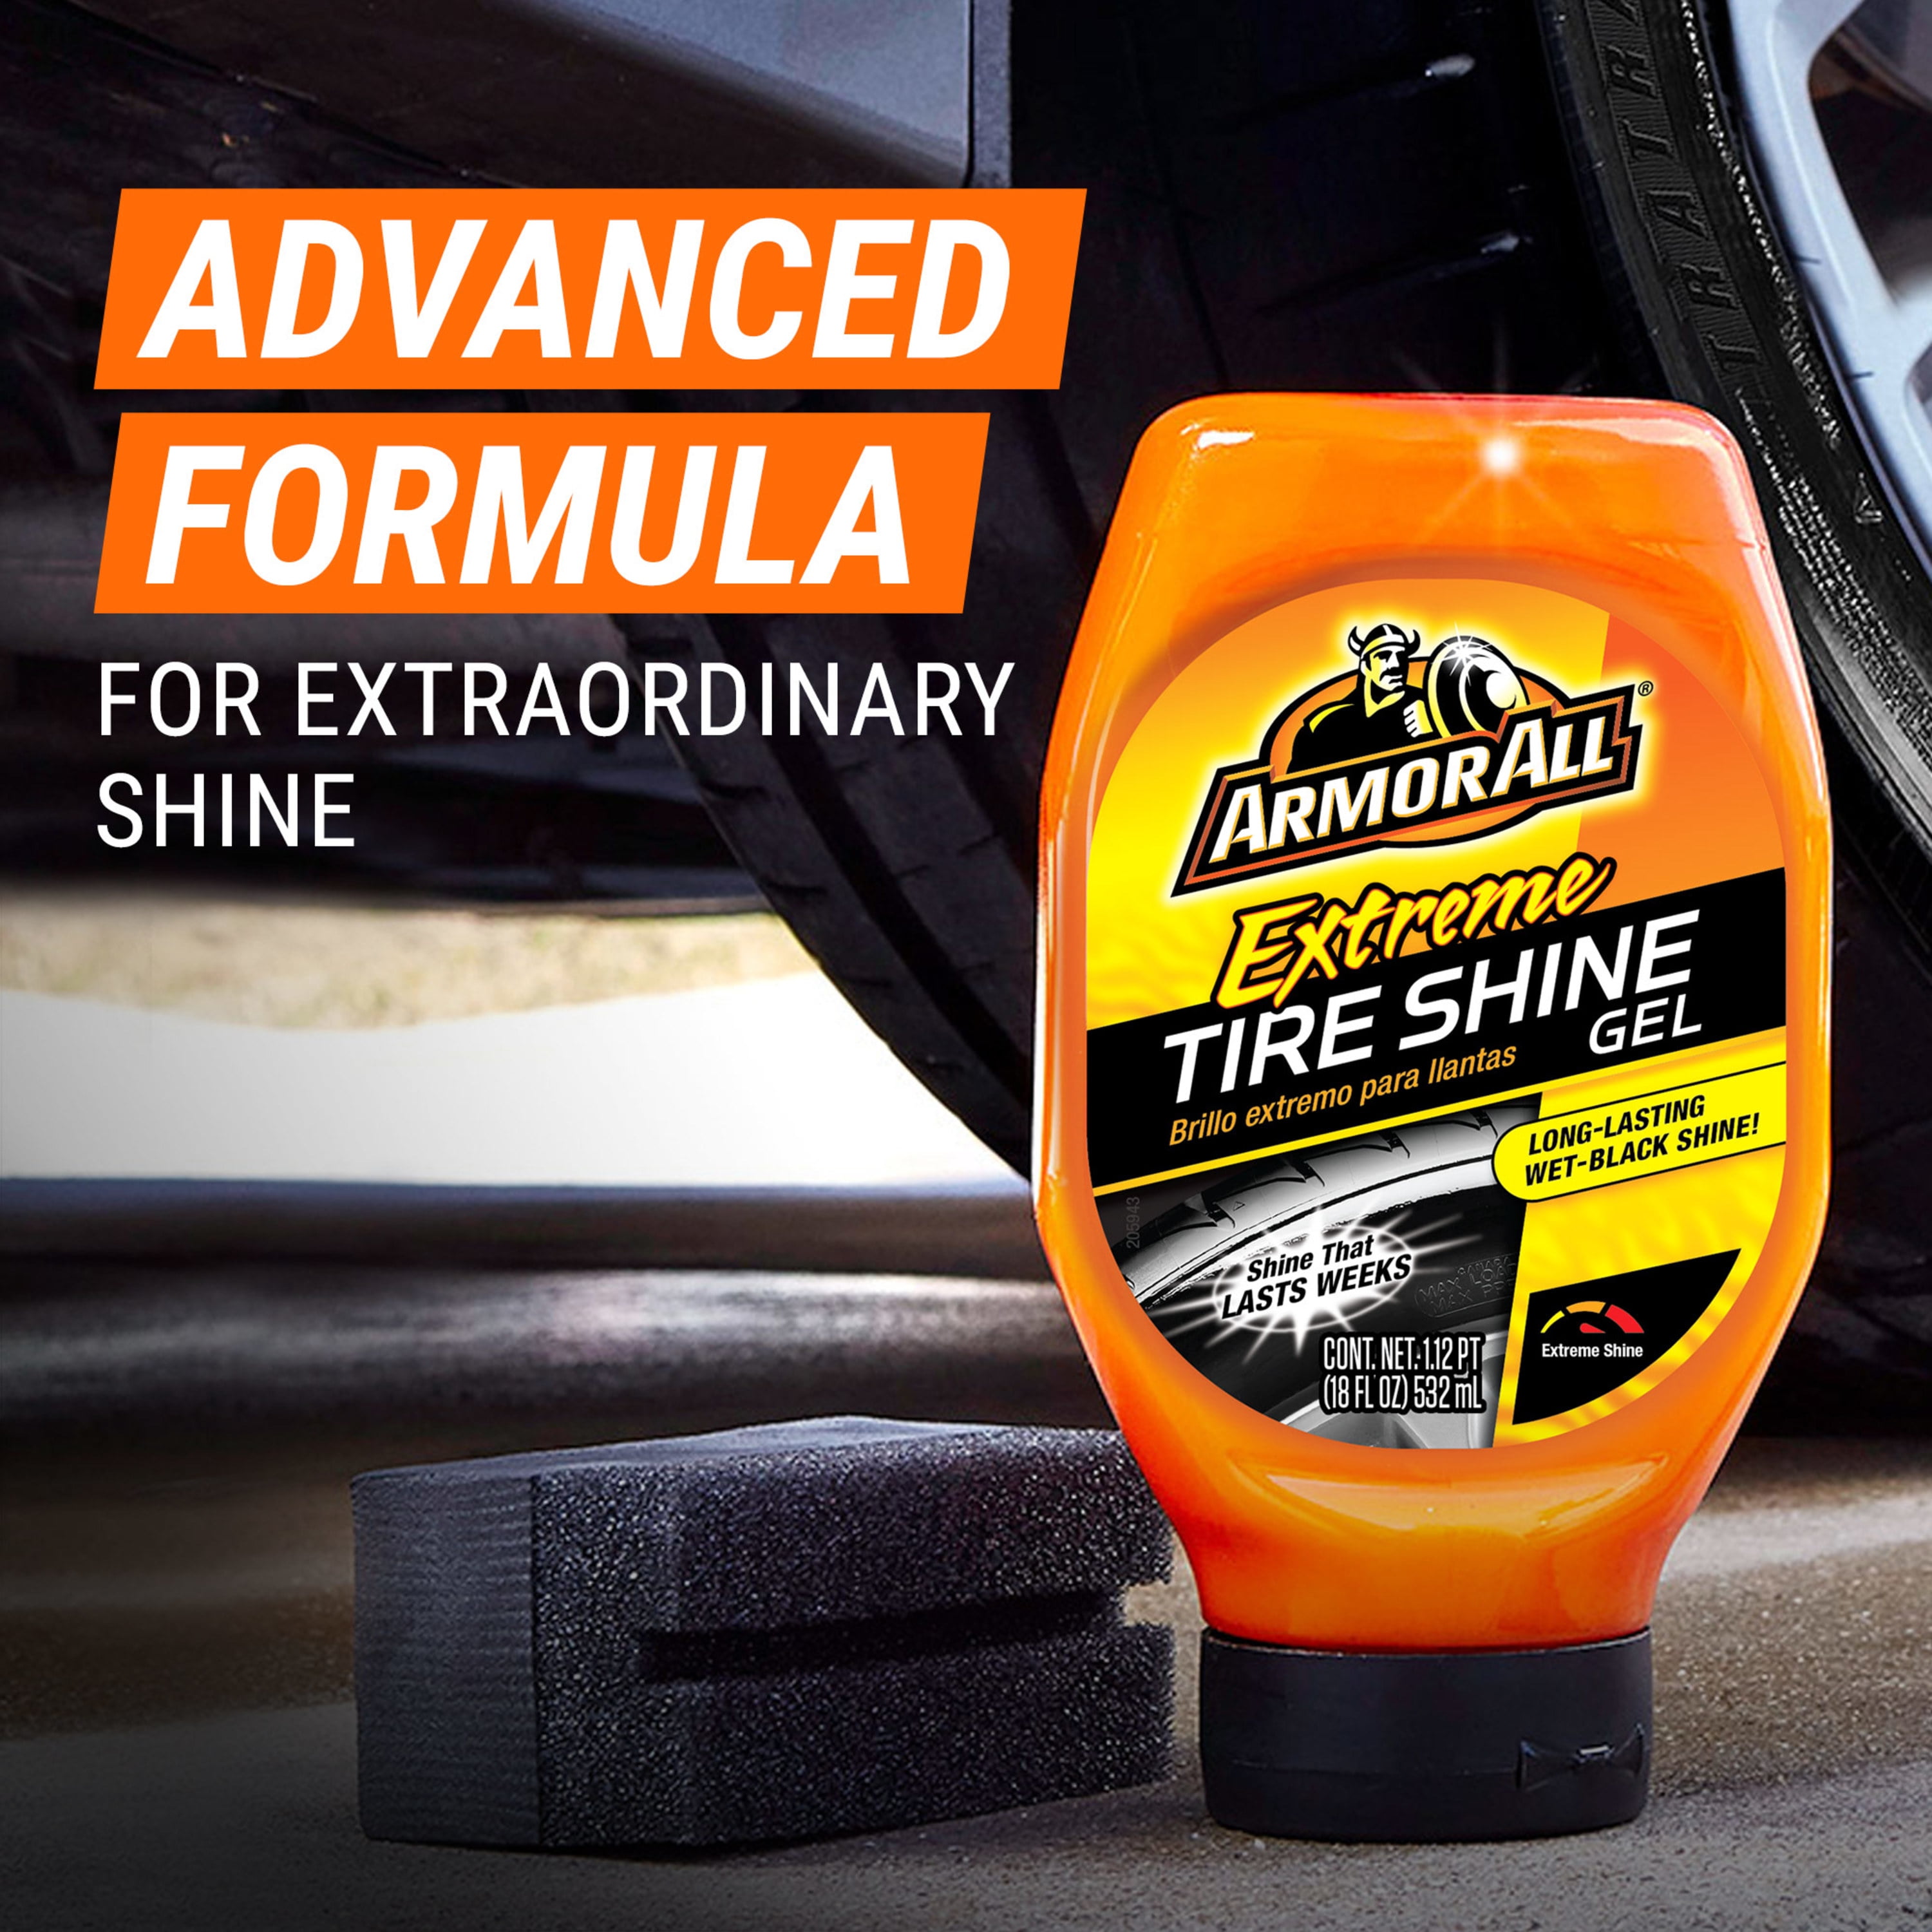 Extreme Tire Shine Gel by Armor All, Tire Shine for Restoring Color and Tire  Protection, 18 Fl Oz by GOSO Direct